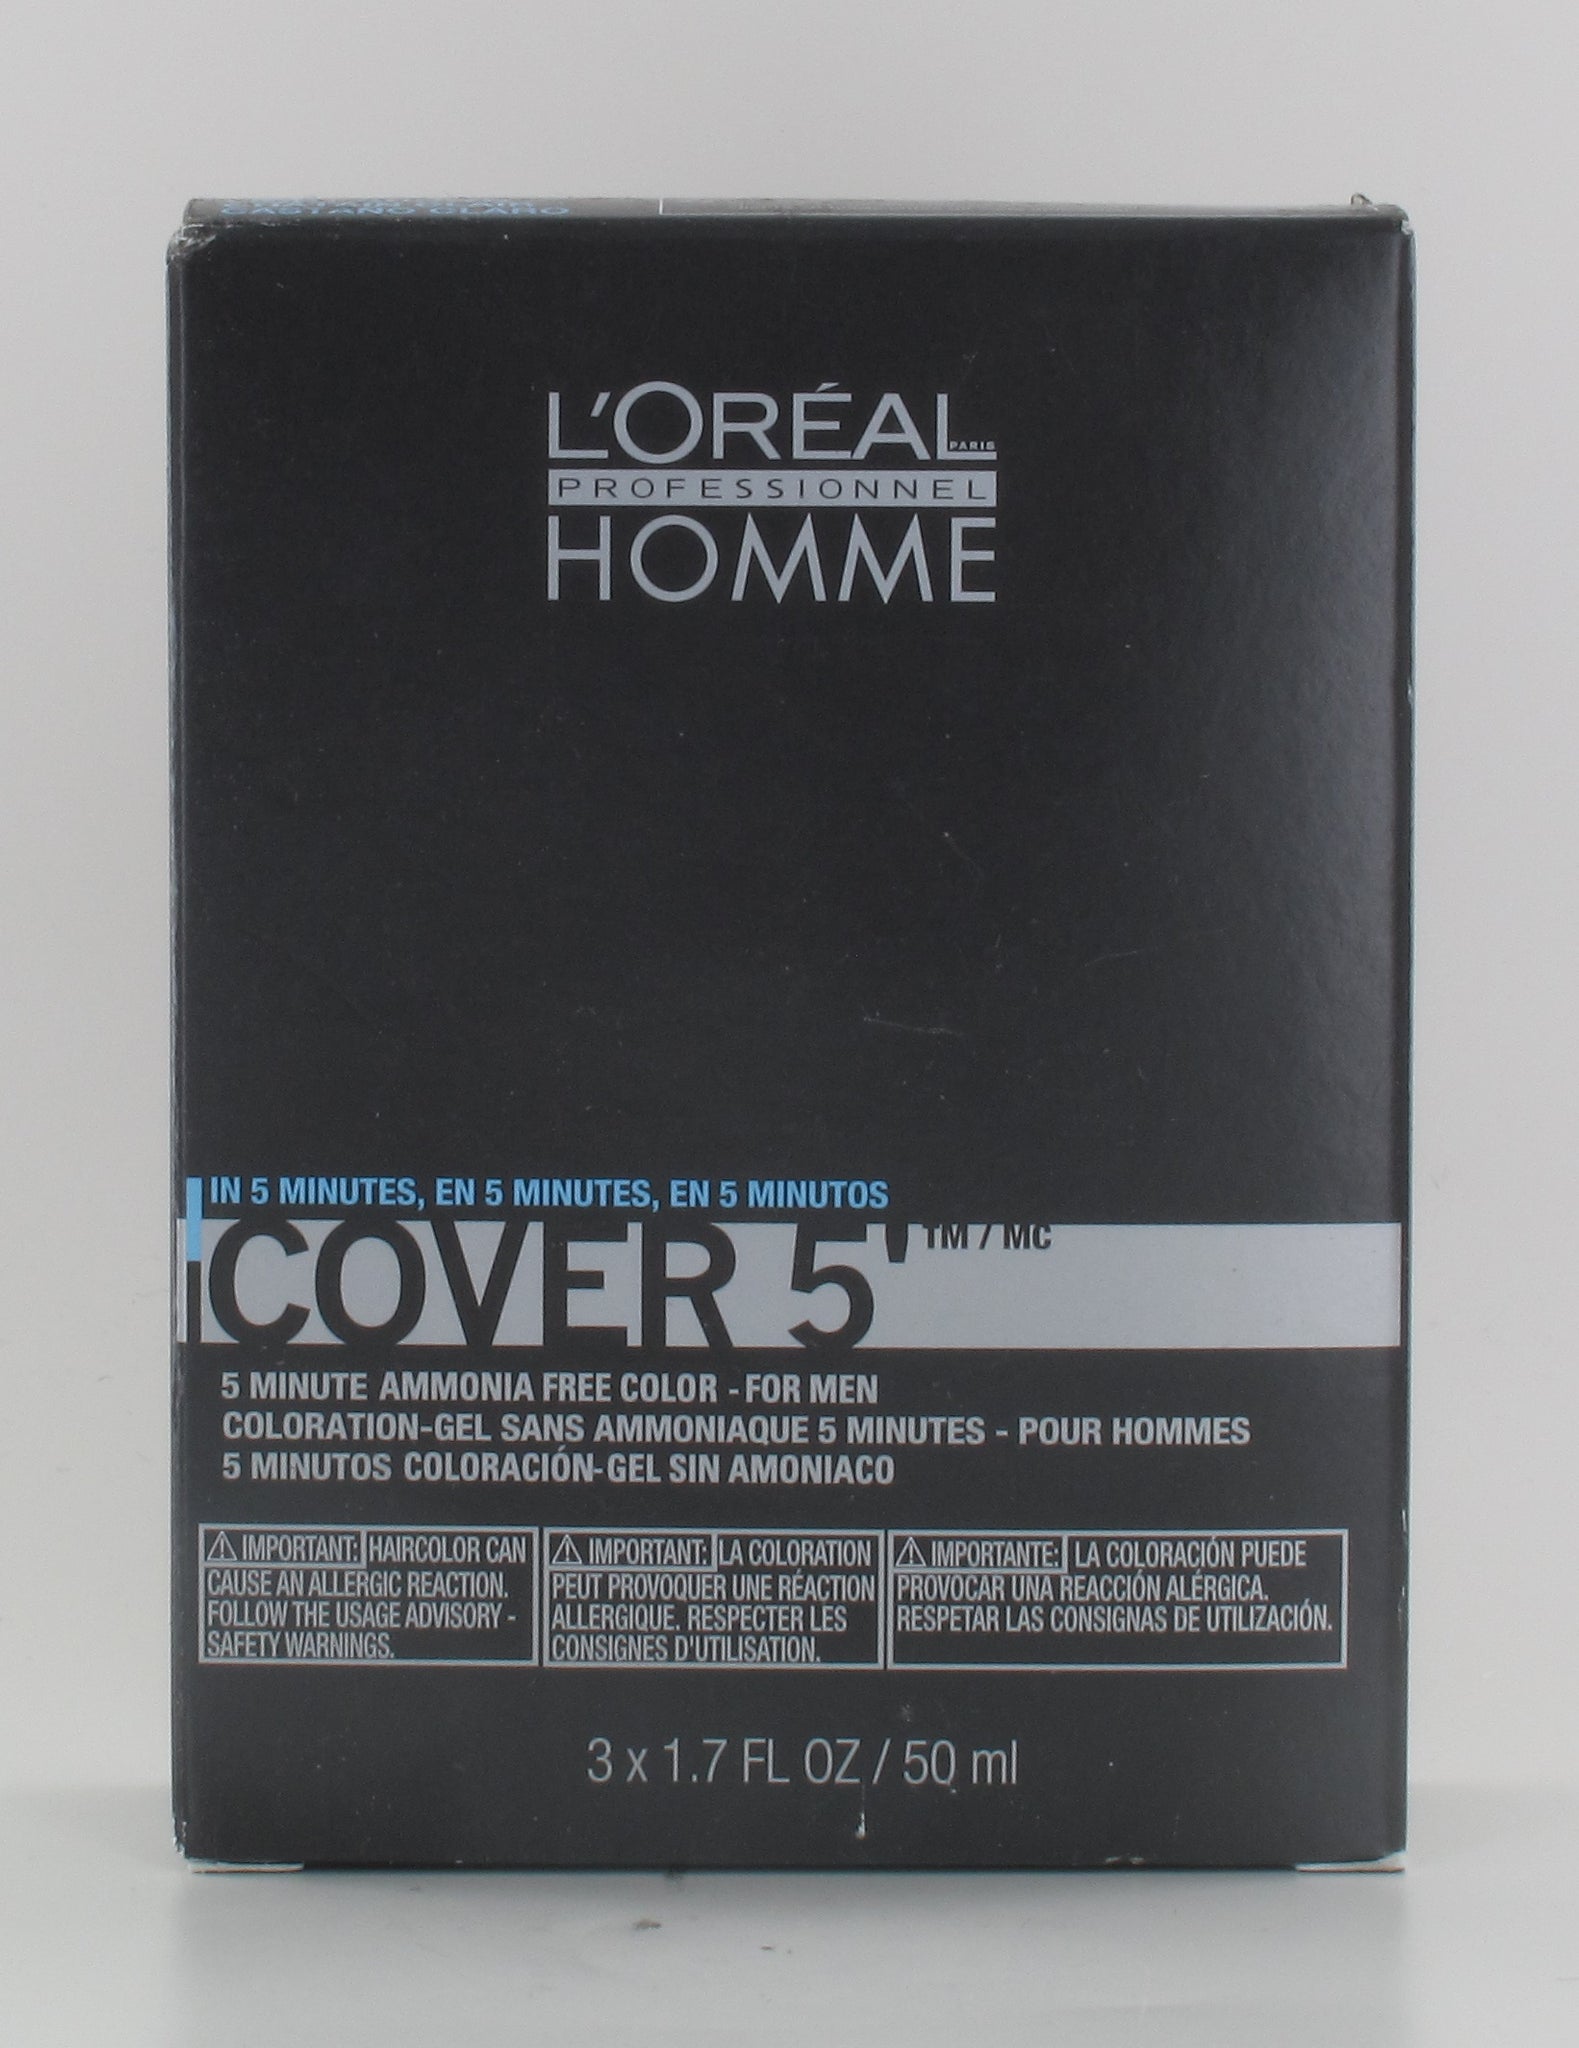 Loreal Homme Cover 5 5 Minute Ammonia Free Color- For Men 3 x 1.7 Oz